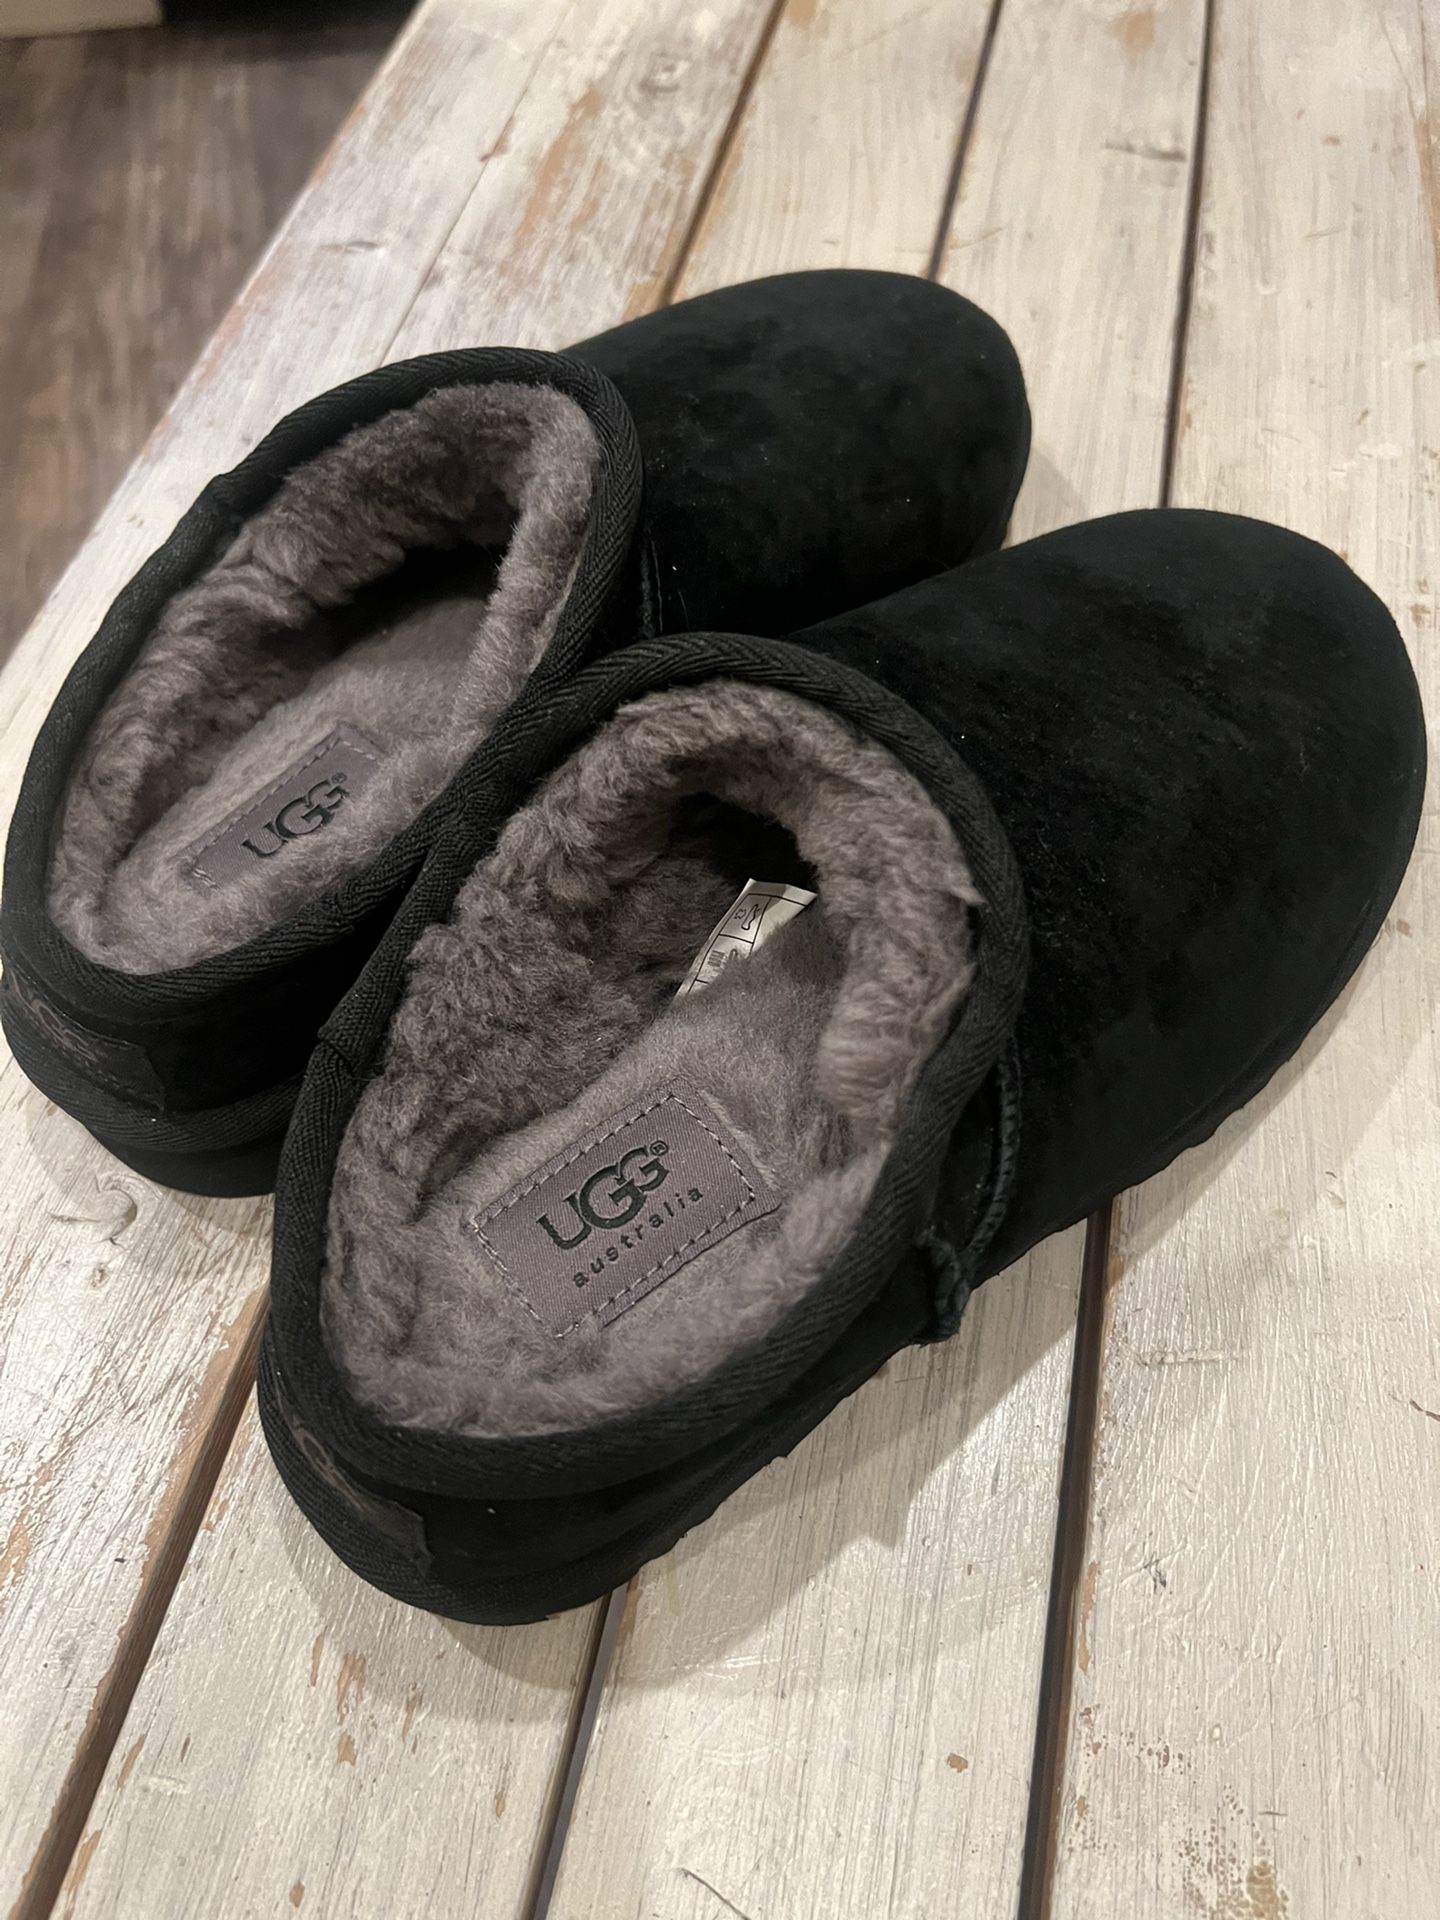 New Ugg Slippers 